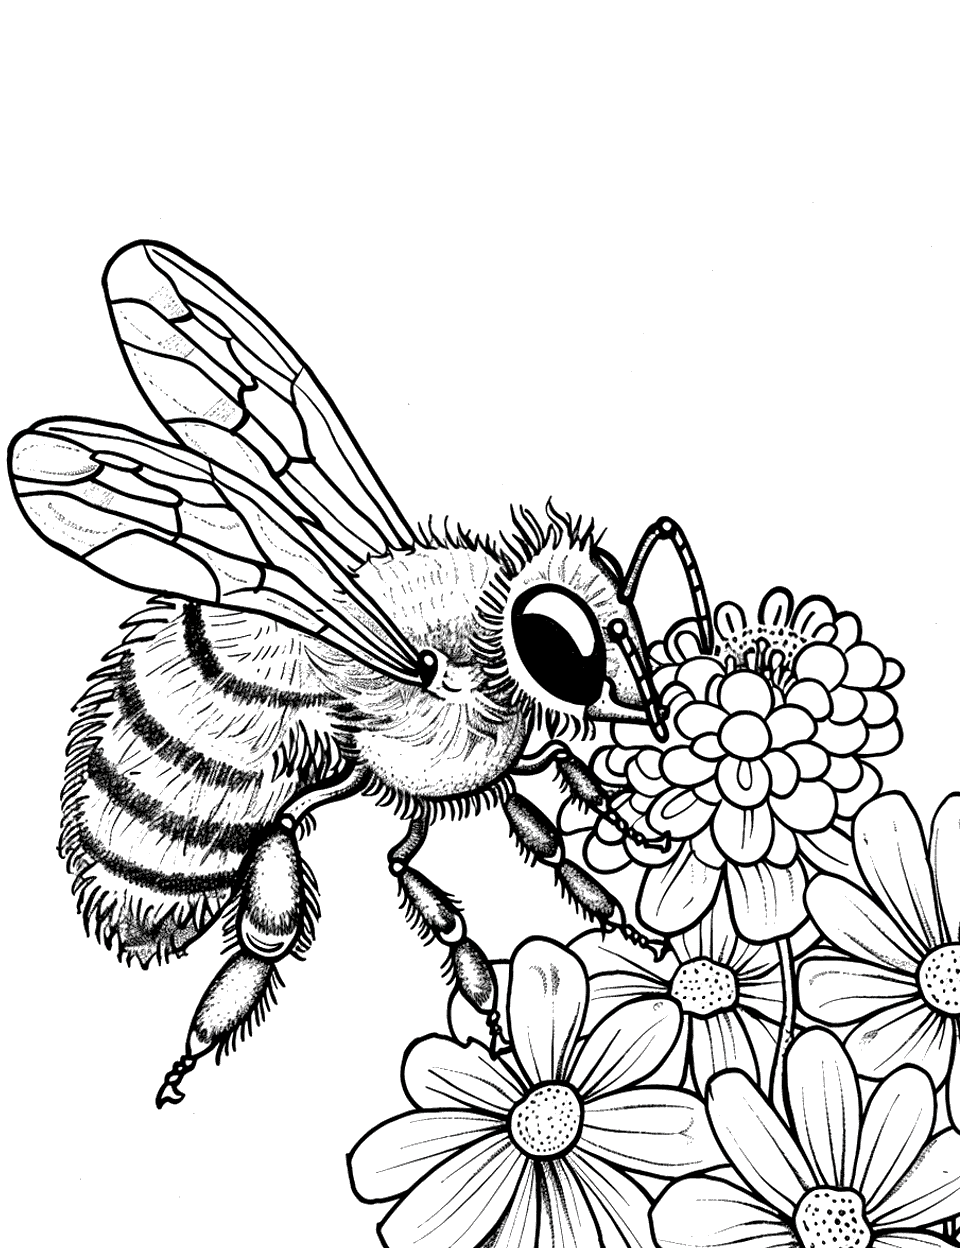 Bee Collecting Nectar Coloring Page - A detailed scene of a bee collecting nectar from a flower.